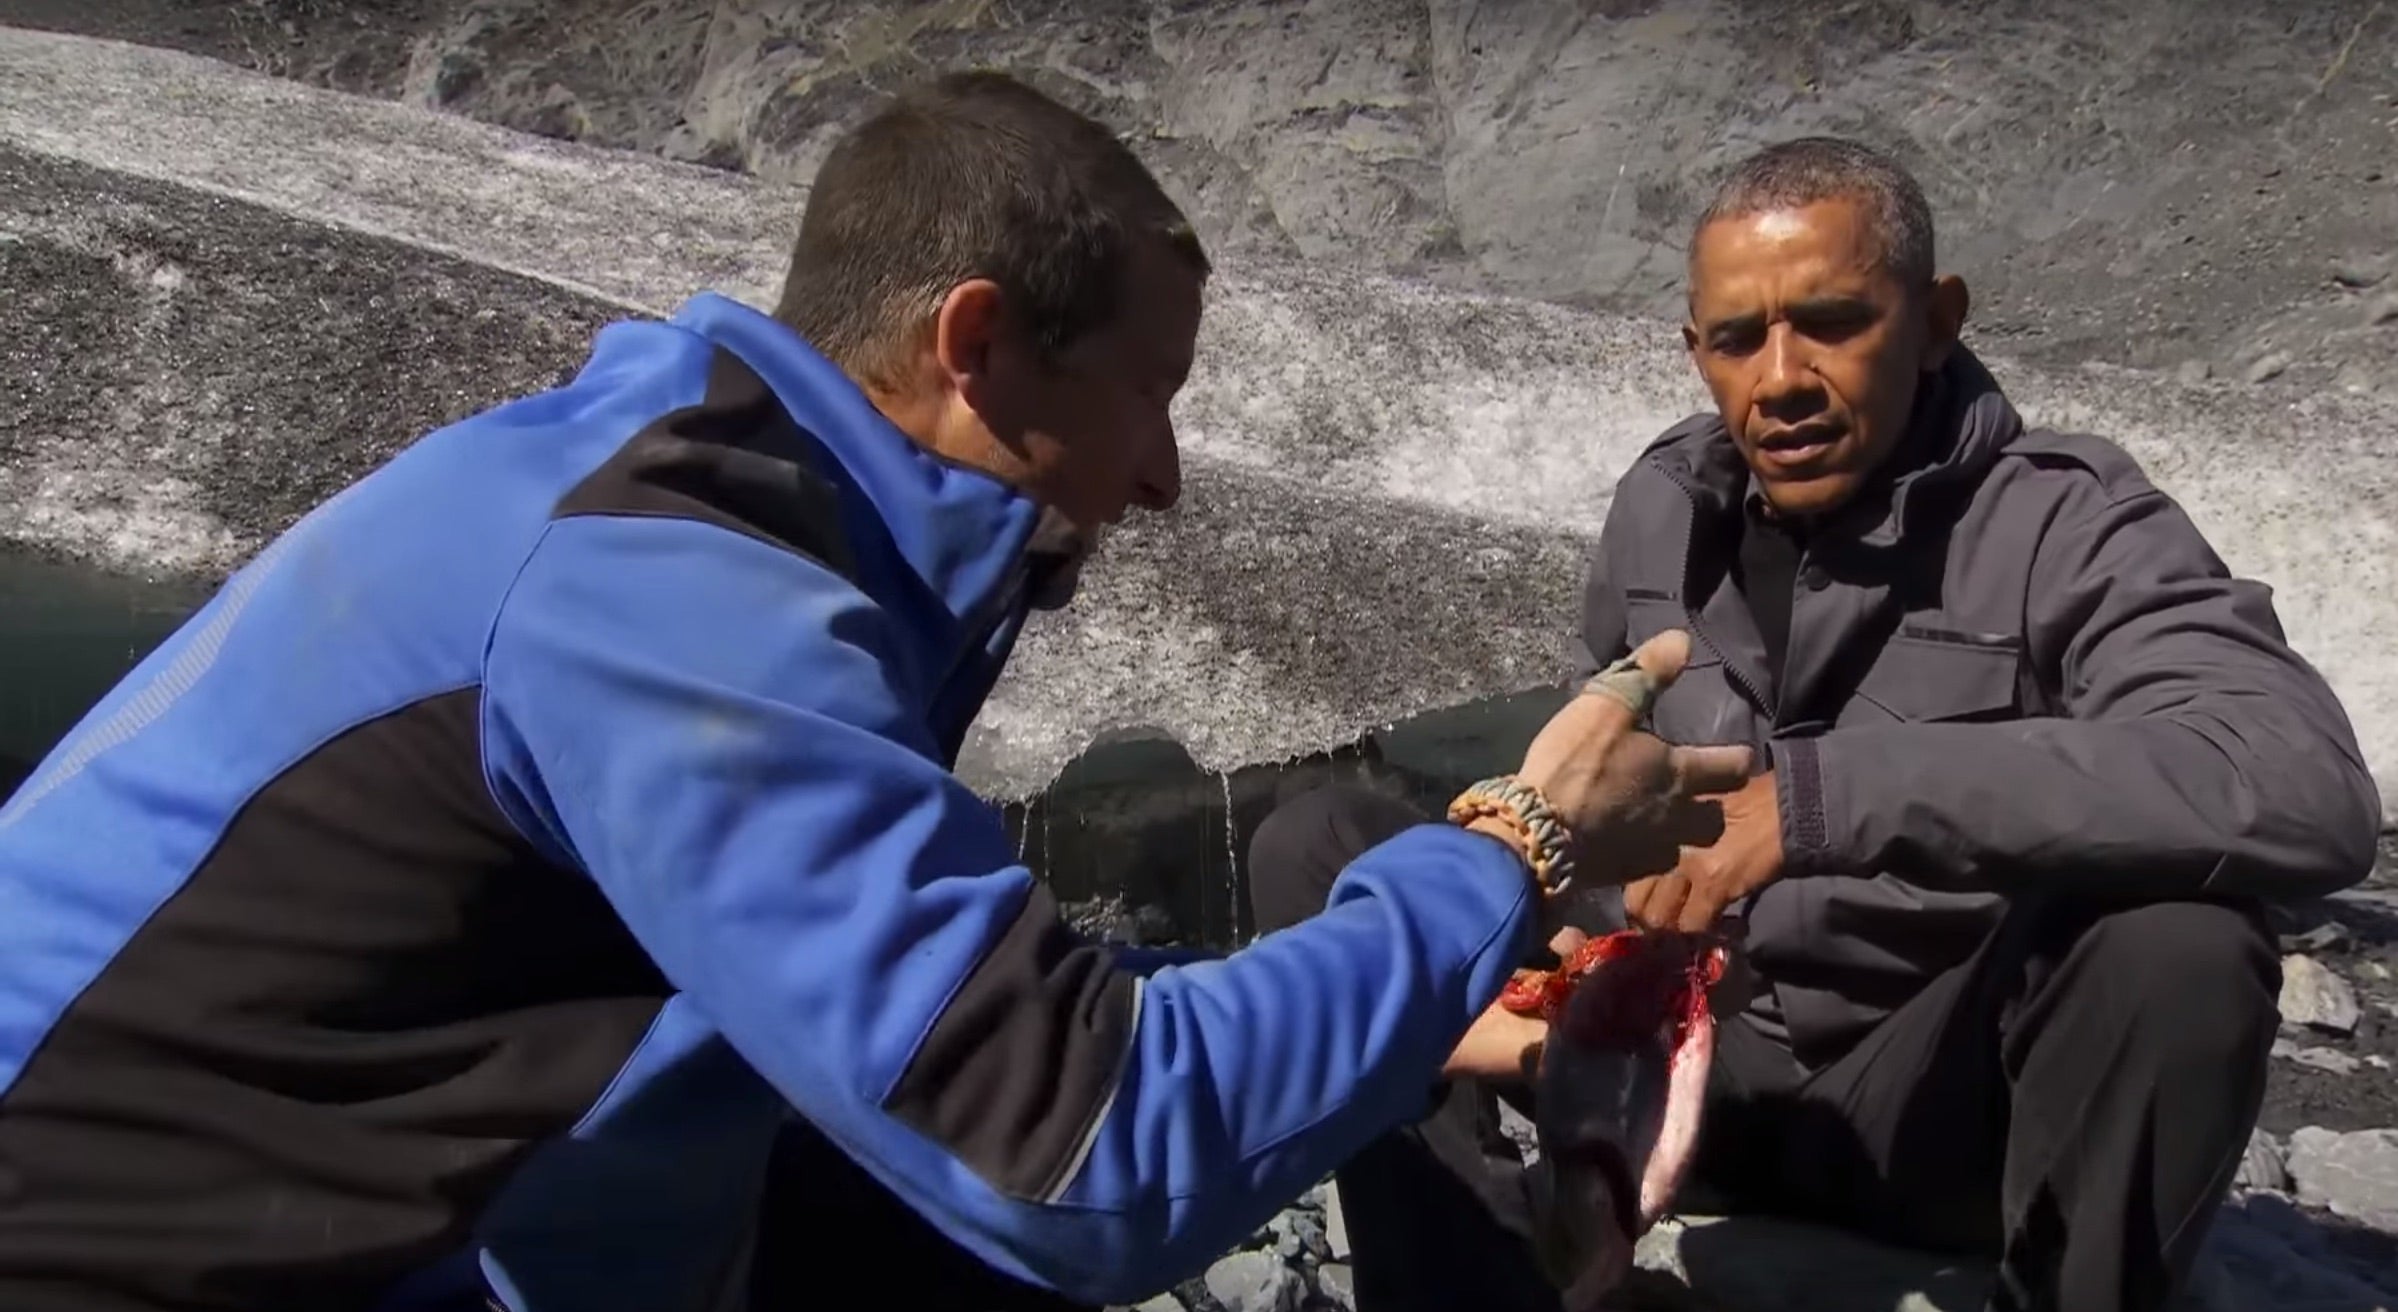 Obama and Grylls in the wild